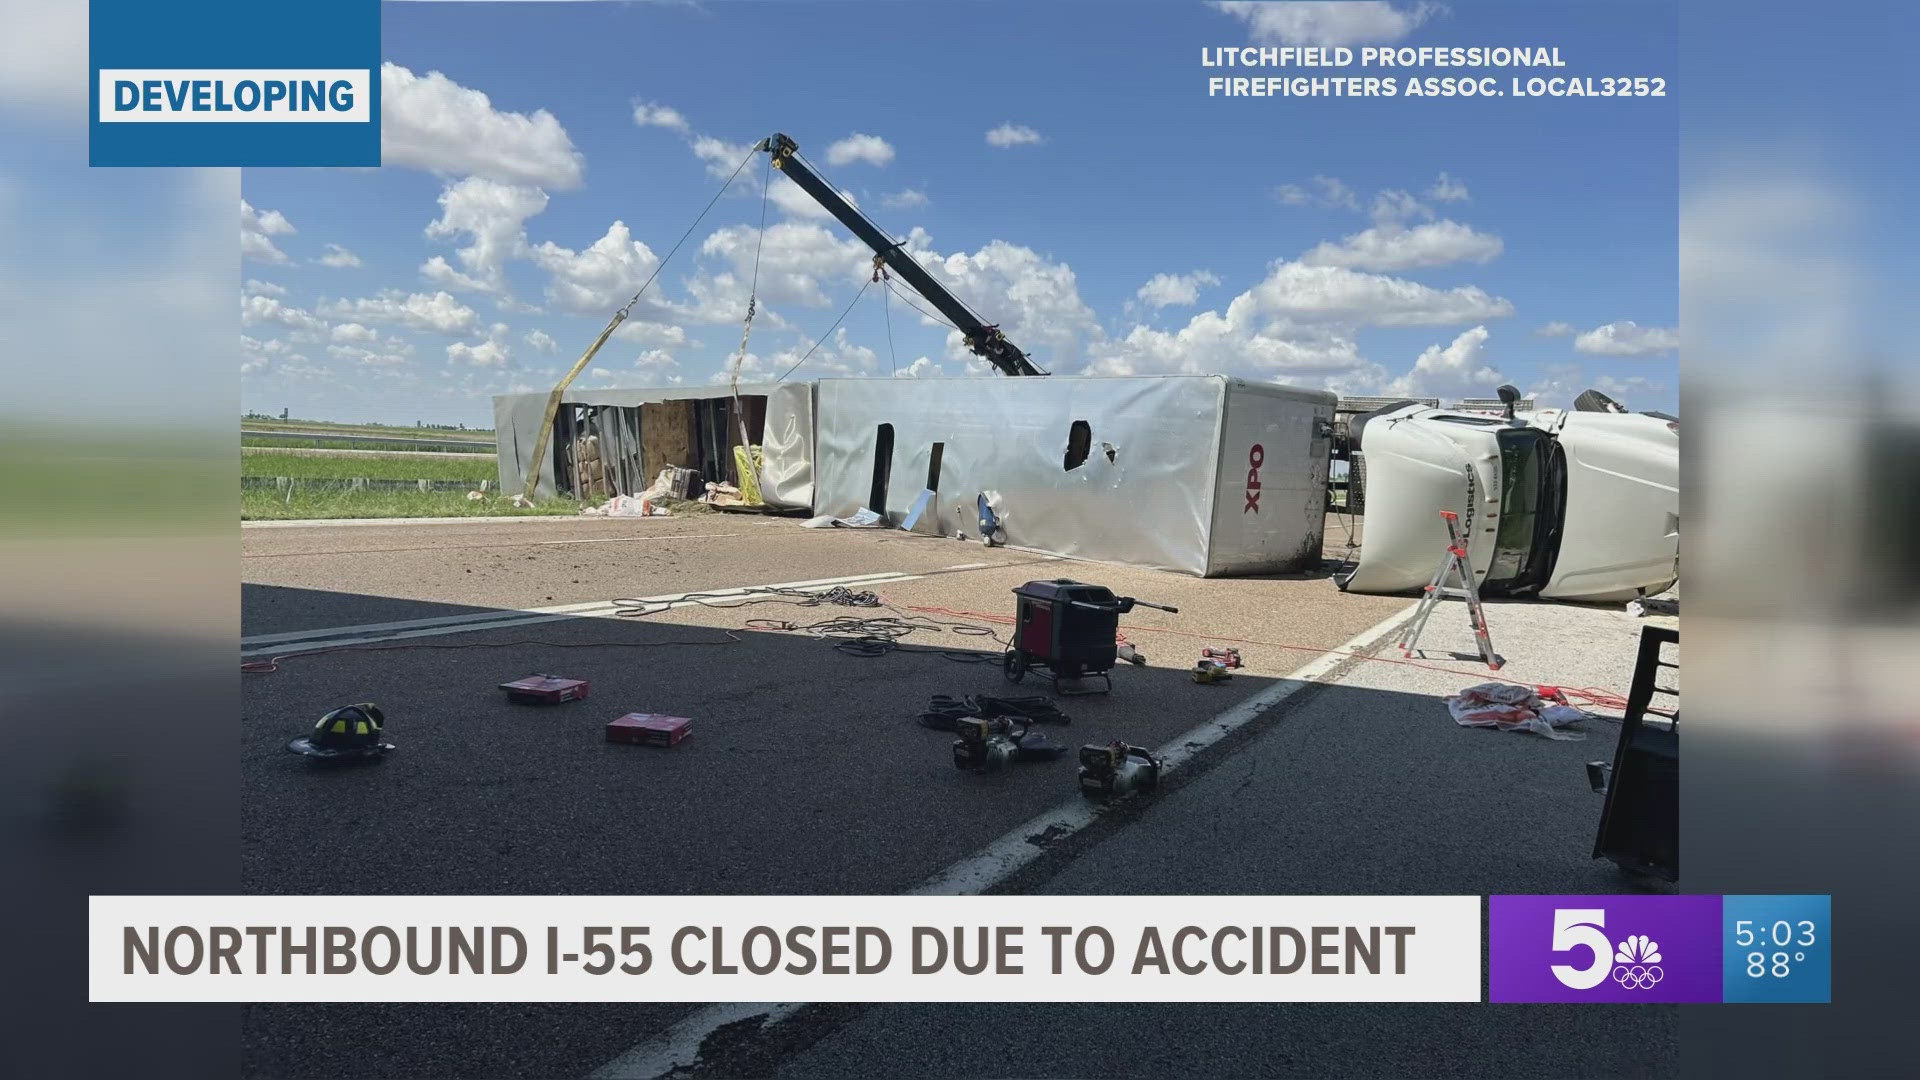 Northbound I-55 is currently shut down due to an investigation and cleanup, ISP said. The lanes are expected to be closed for an extended period of time.